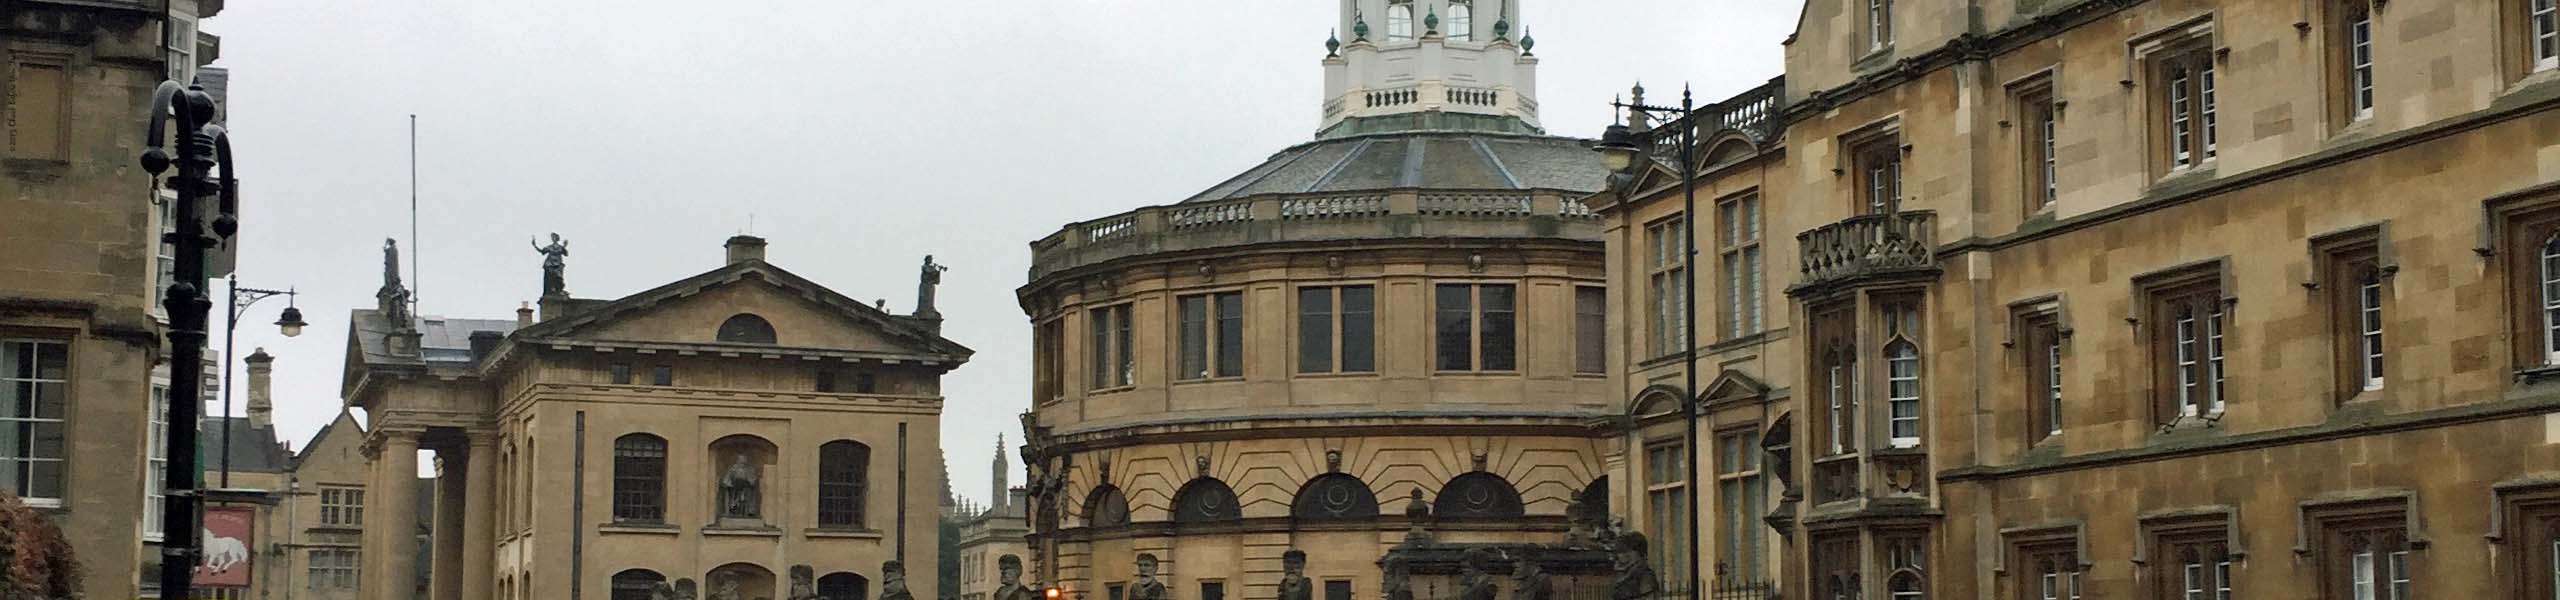 Clarendon Building and Sheldonian Theatre on Broad Street - Oxford, England